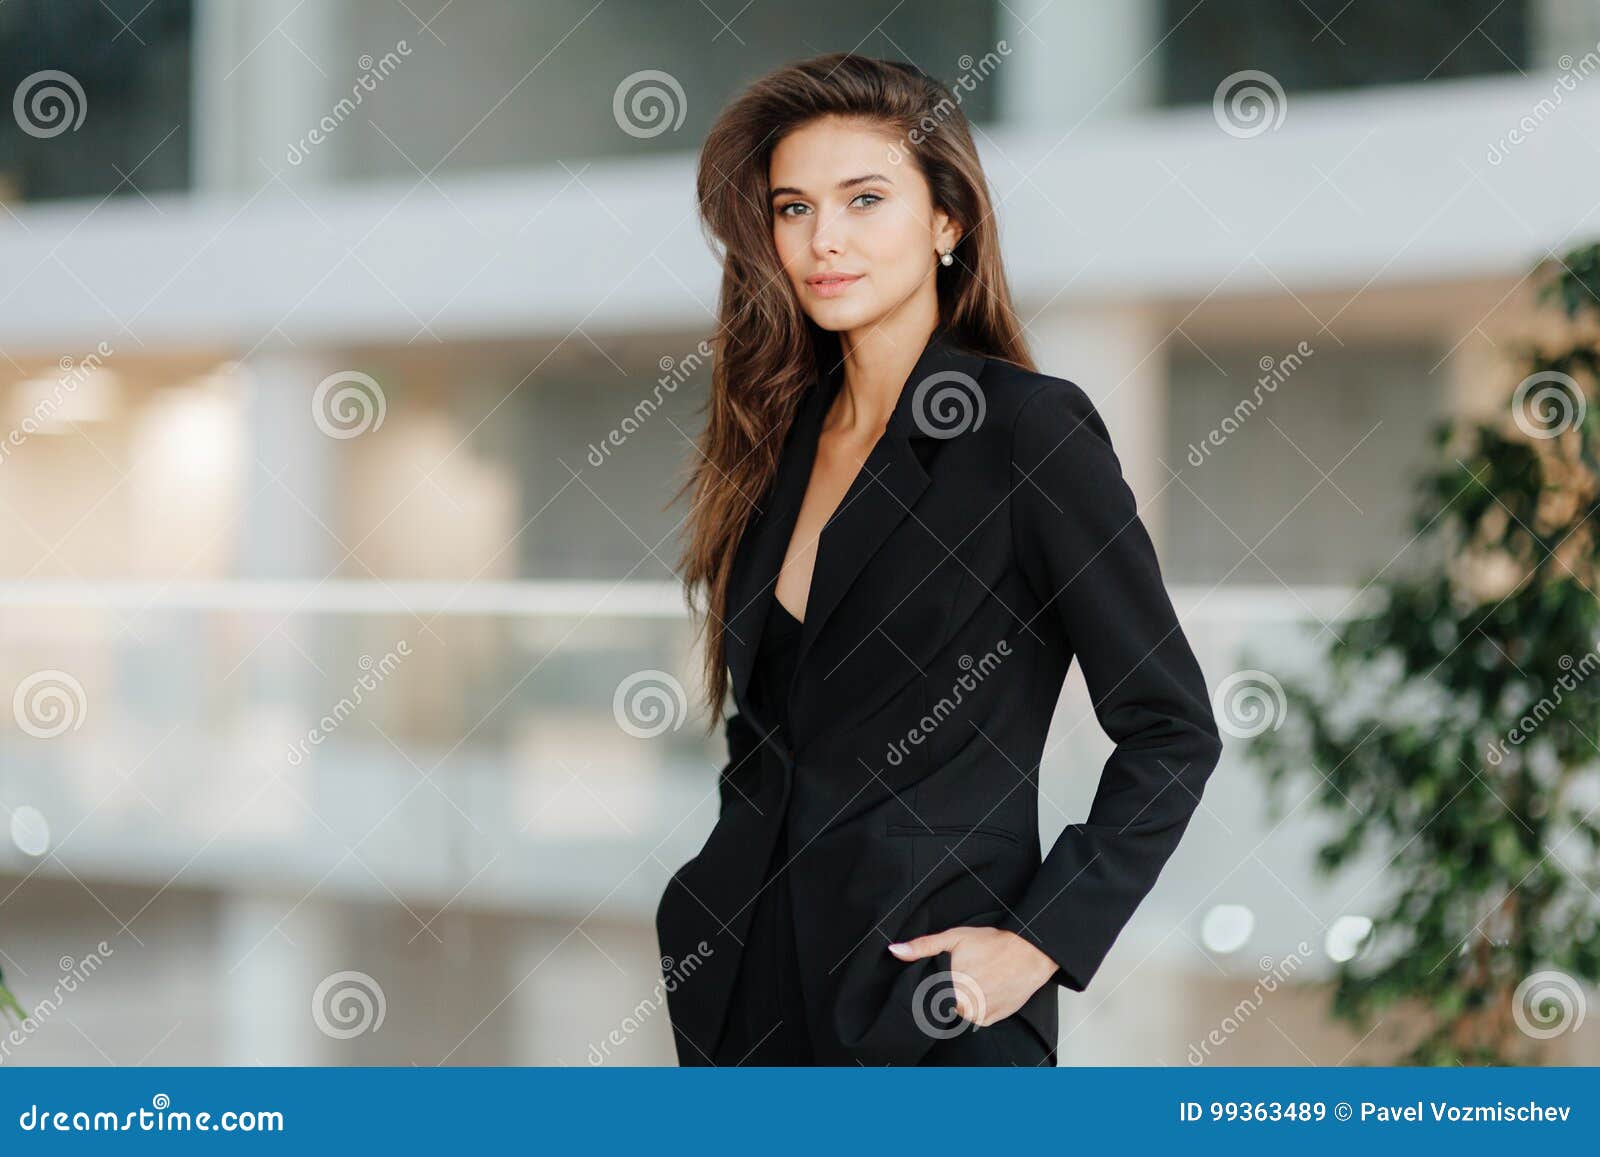 Portrait Of A Russian Girl Stock Image Image Of Curly 99363489